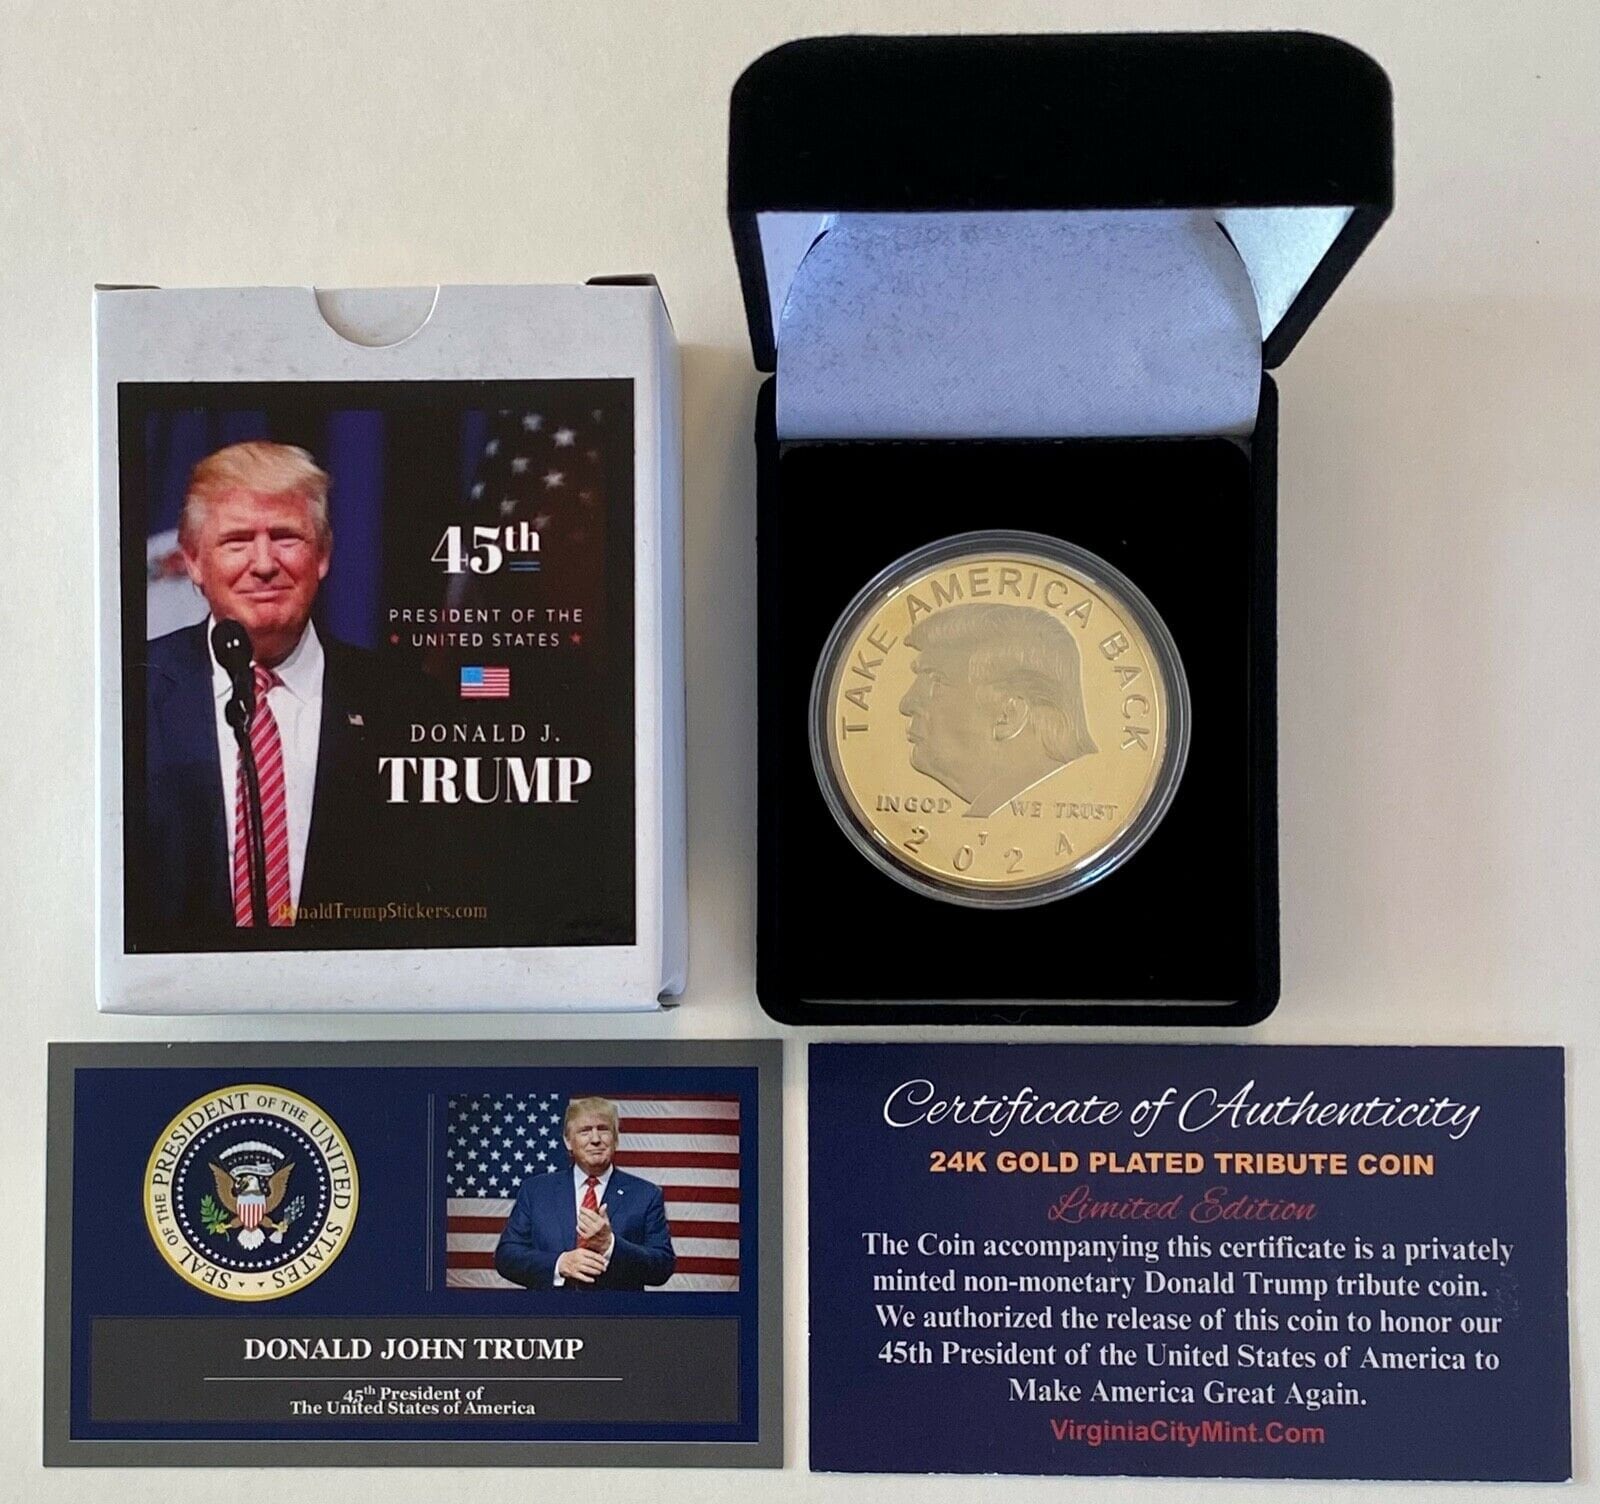 DONALD TRUMP KEEP AMERICA GREAT 2020 Gold Coin 24K Gold Plated Commemorative Collectors Edition Stunning Proof Coin In Acrylic Capsule Trump Challenge Coin 